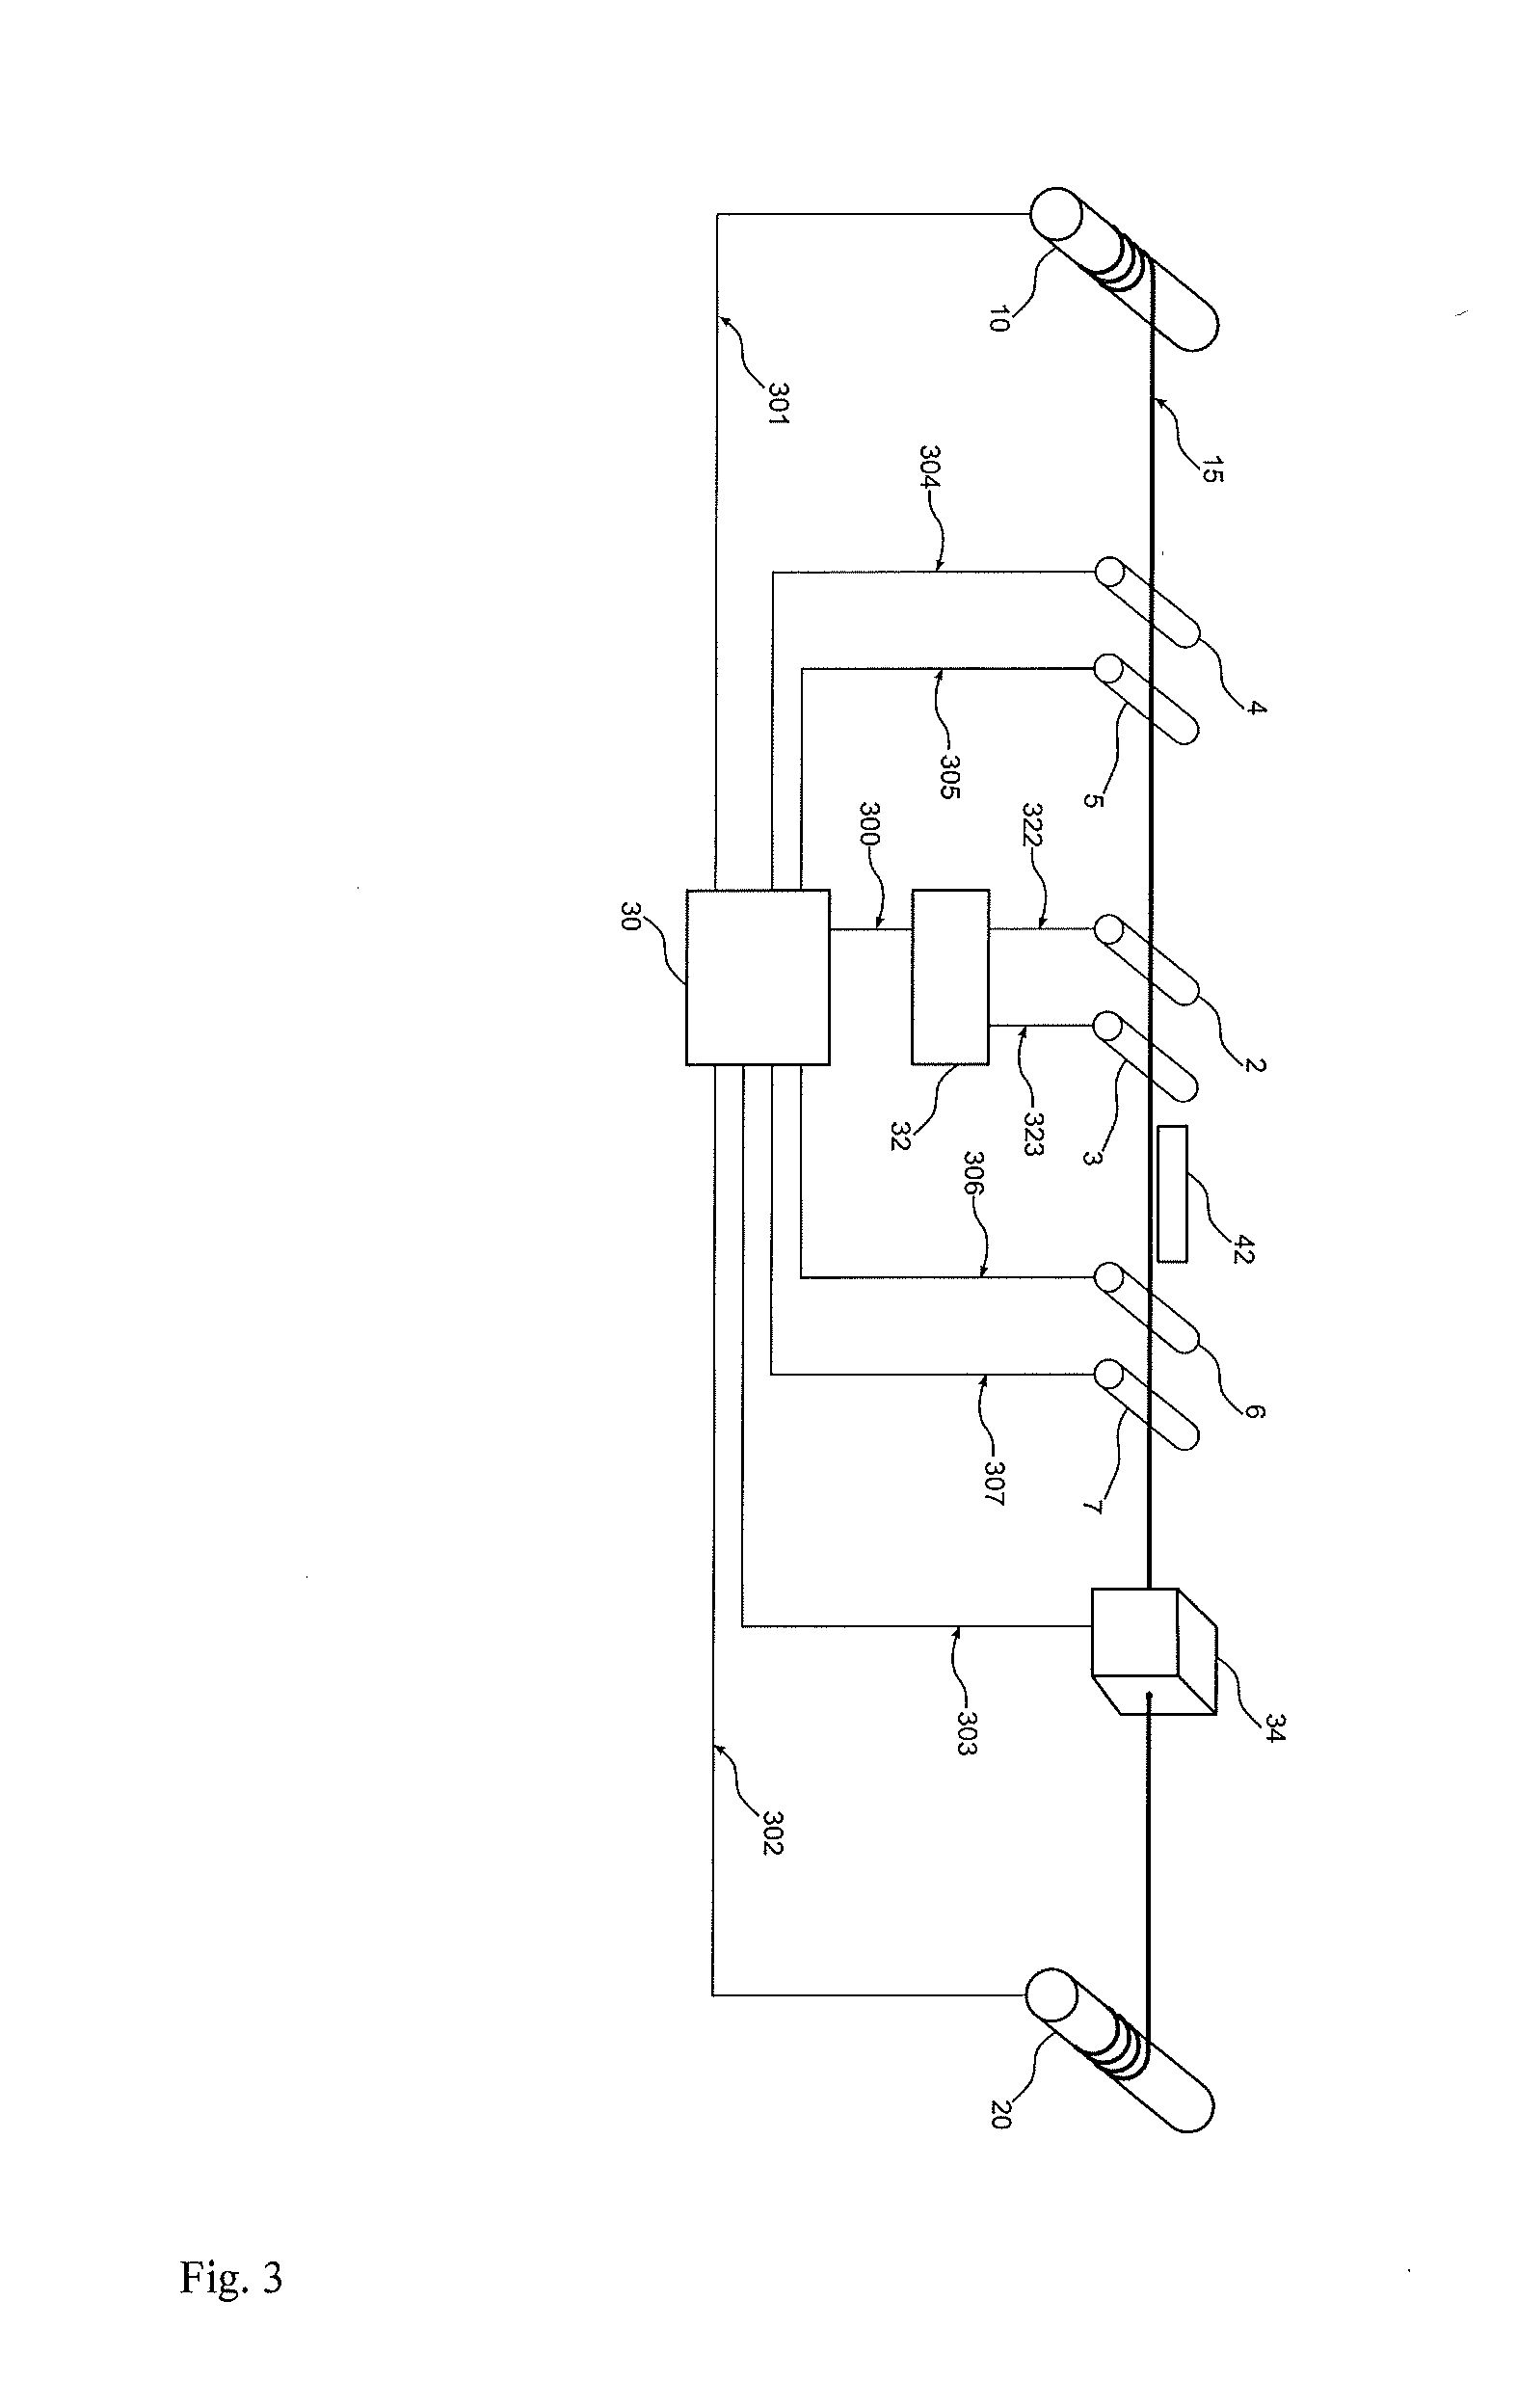 Method of heat treatment and/or inspection of functional mechanical properties, particularly transformation strain and/or strength, of shape memory alloy filaments and apparatus for the application of this method